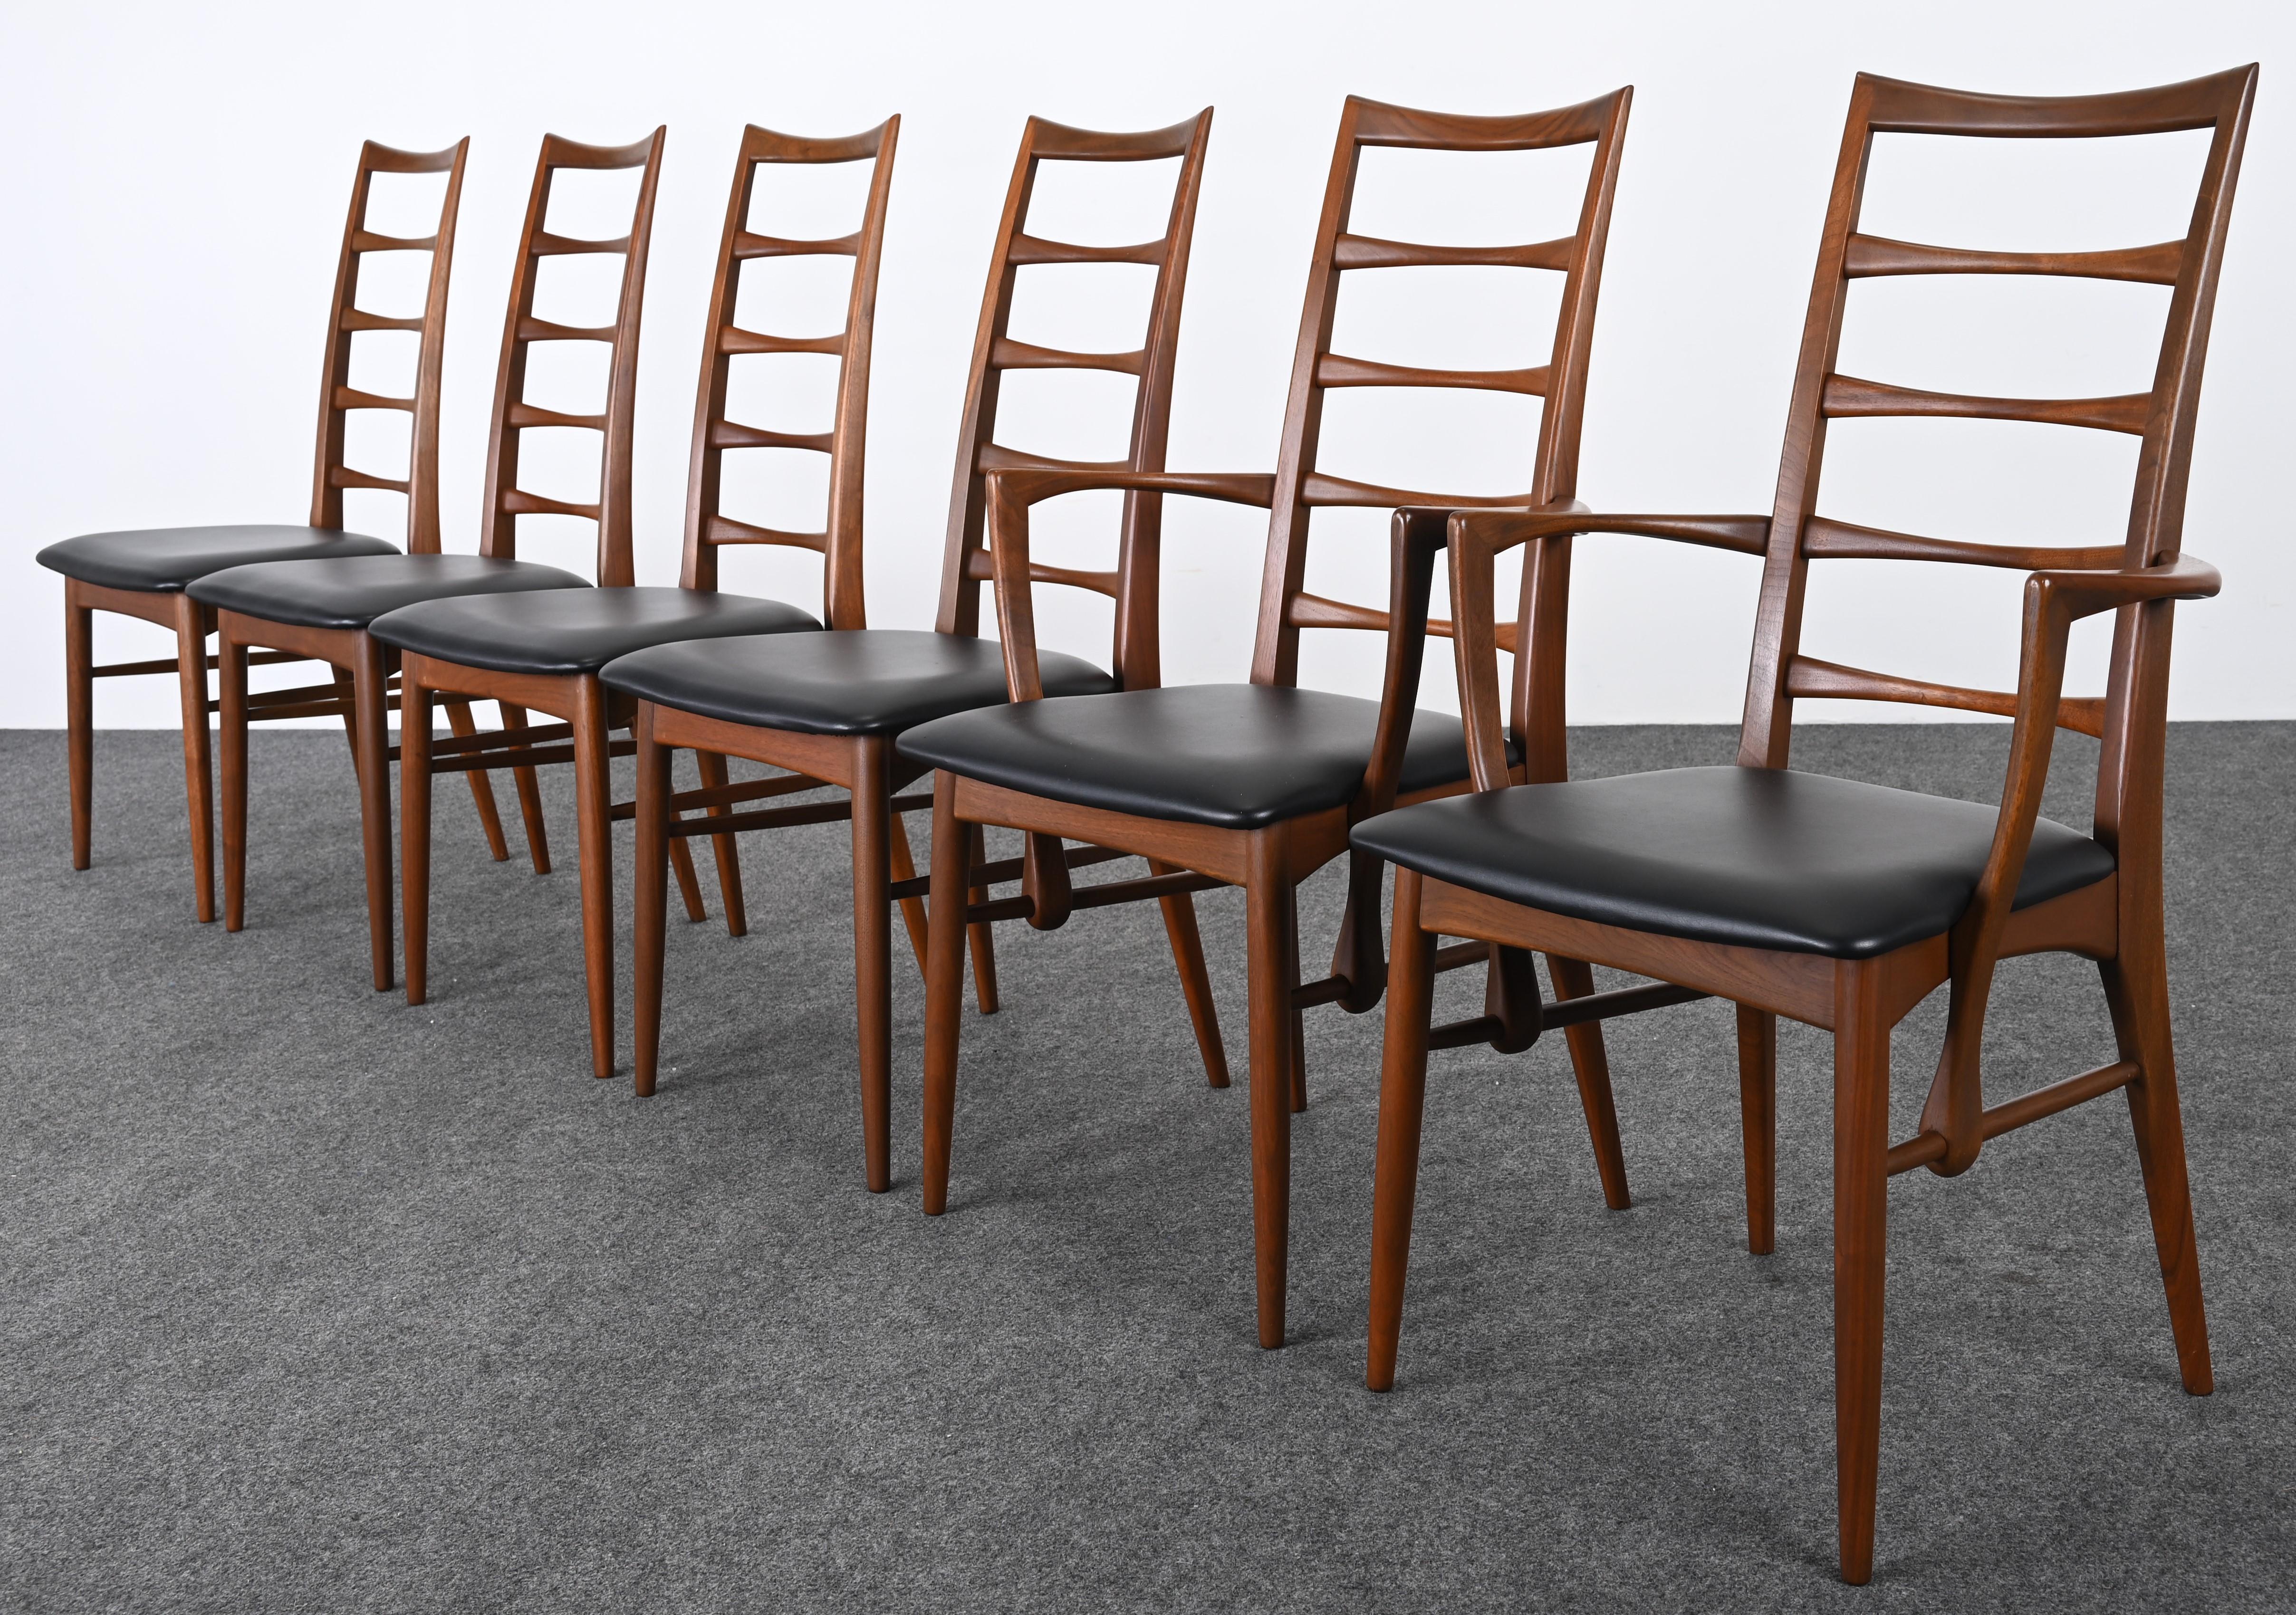 A wonderful set of six teak dining chairs by Niels Koefoed for Koefoeds Hornslet, circa 1960s. In this set are 4 side chairs and 2 armchairs with original black vinyl seats. The ladder back chairs are beautifully proportioned with beautiful details